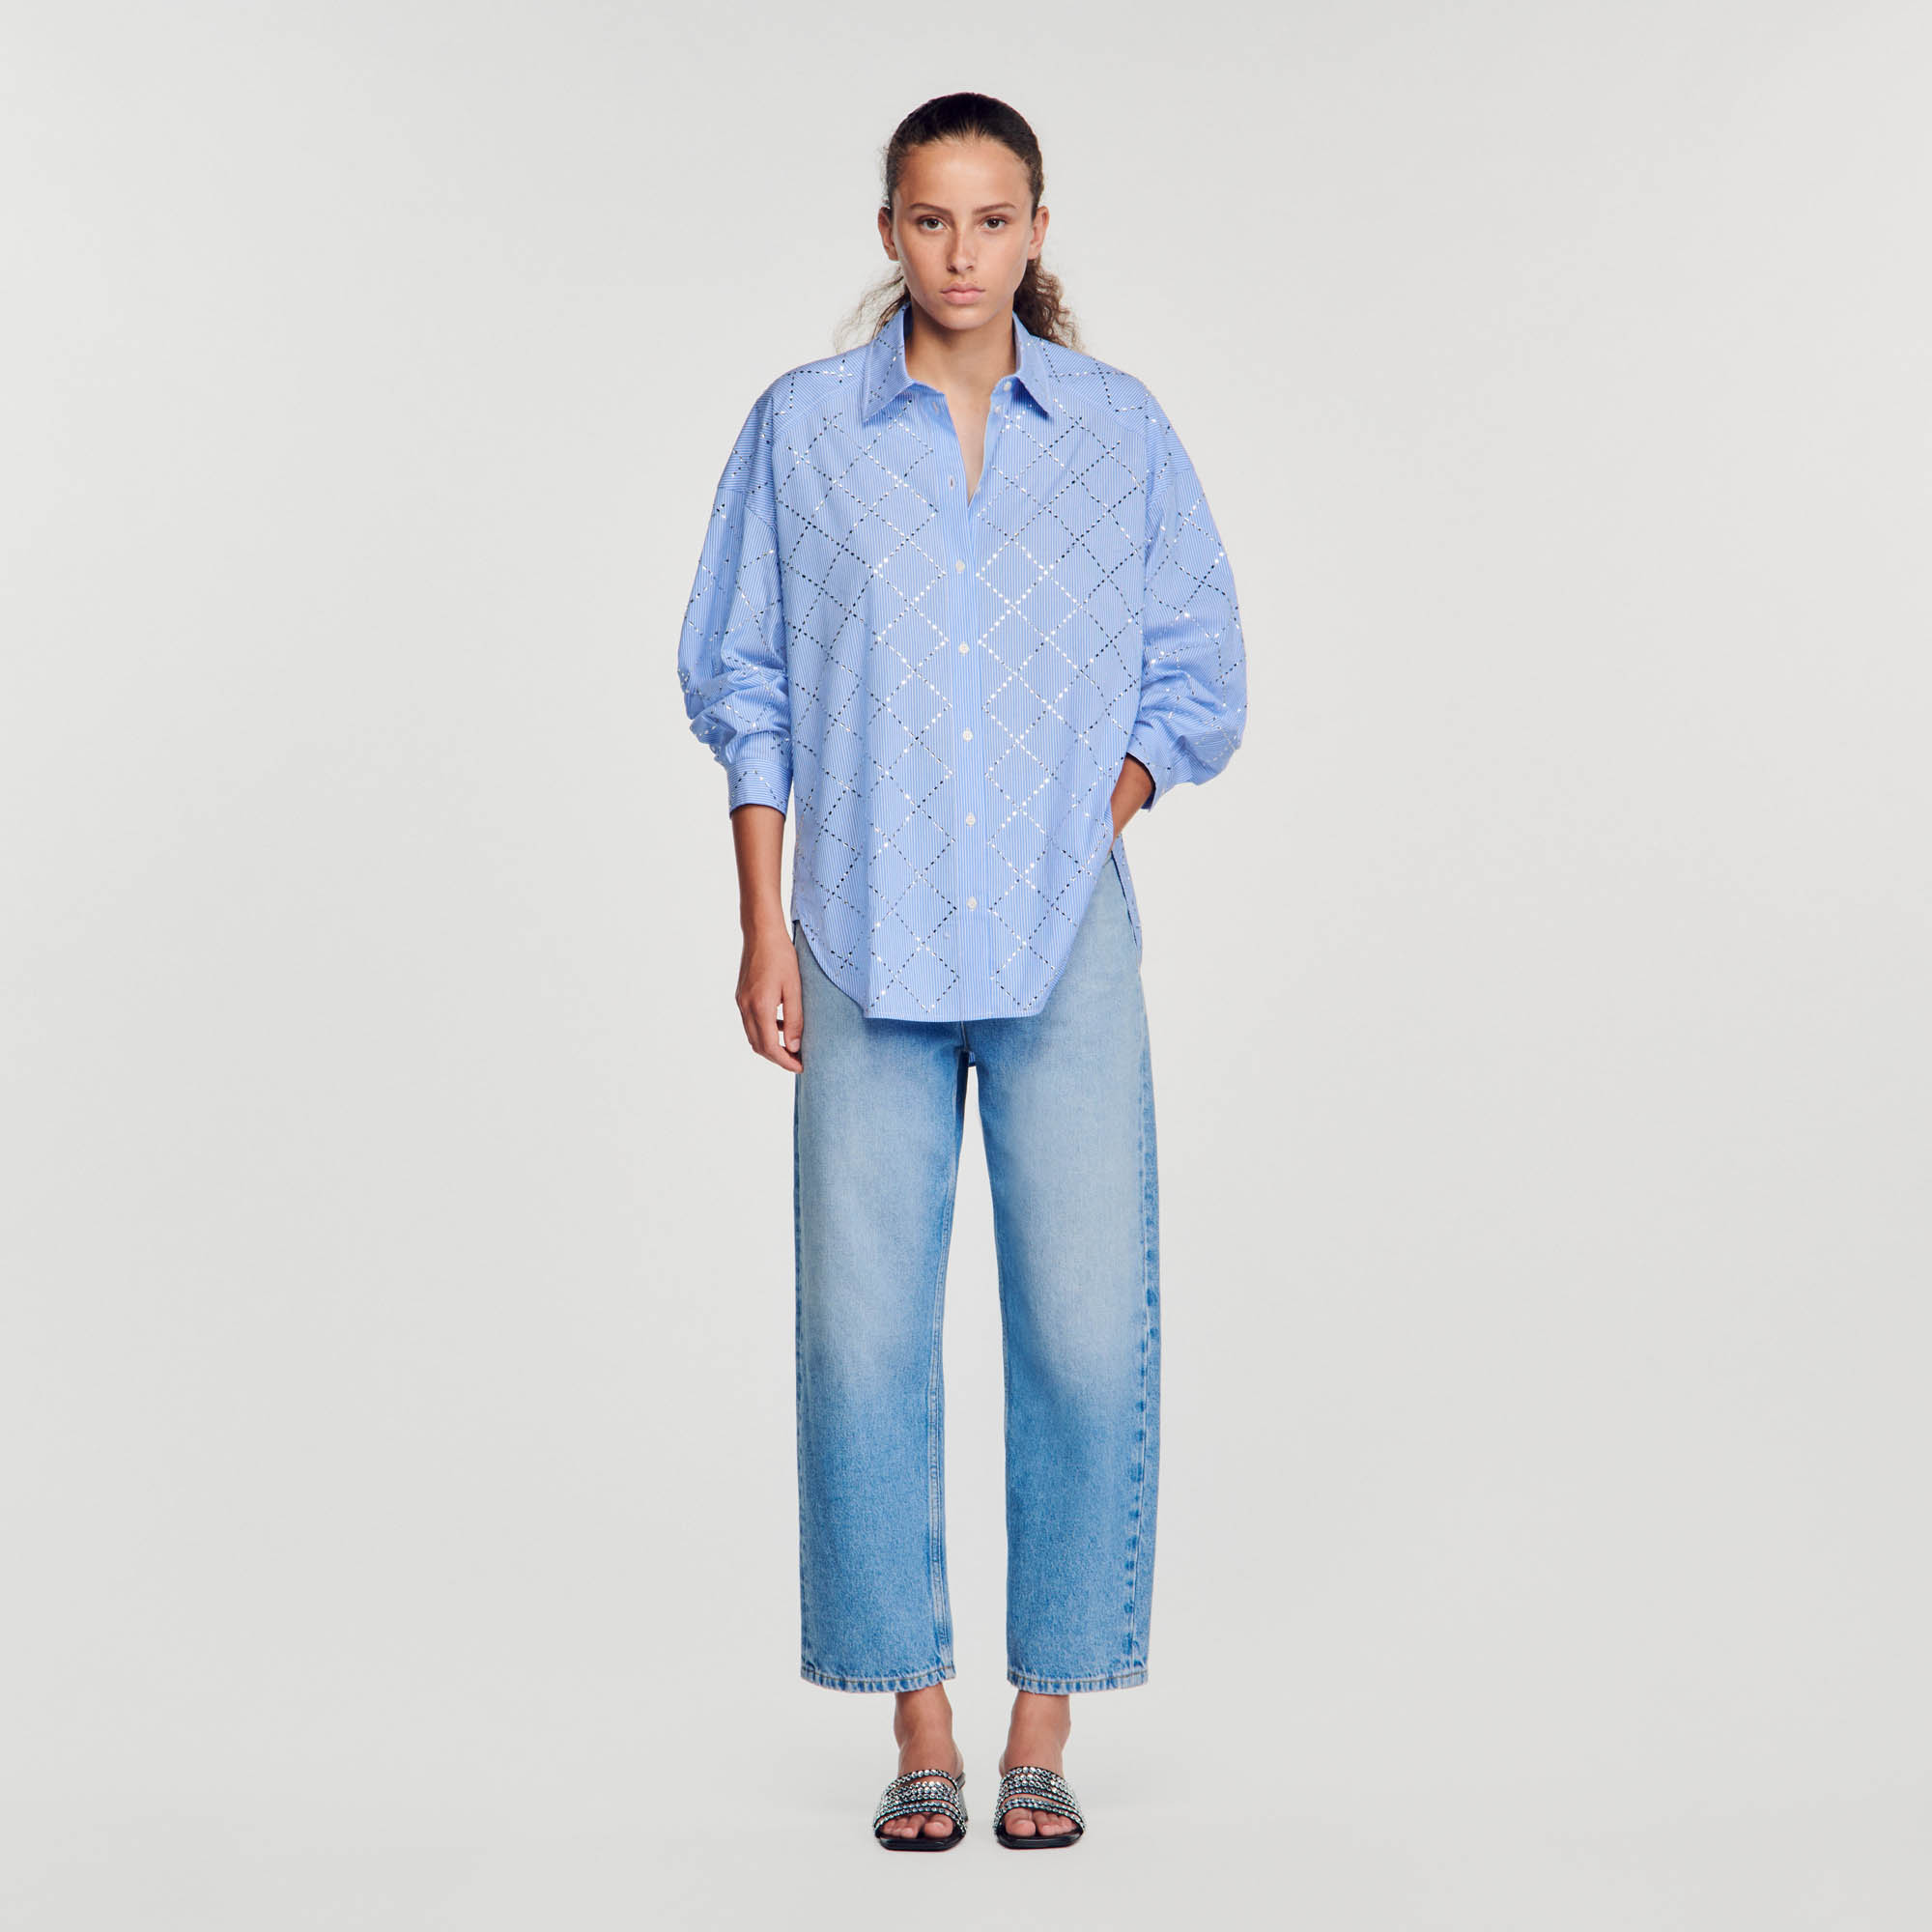 Sandro cotton Diamante: Oversized cotton poplin shirt with thin rhinestone stripes, a collar, long sleeves, and a button fastening